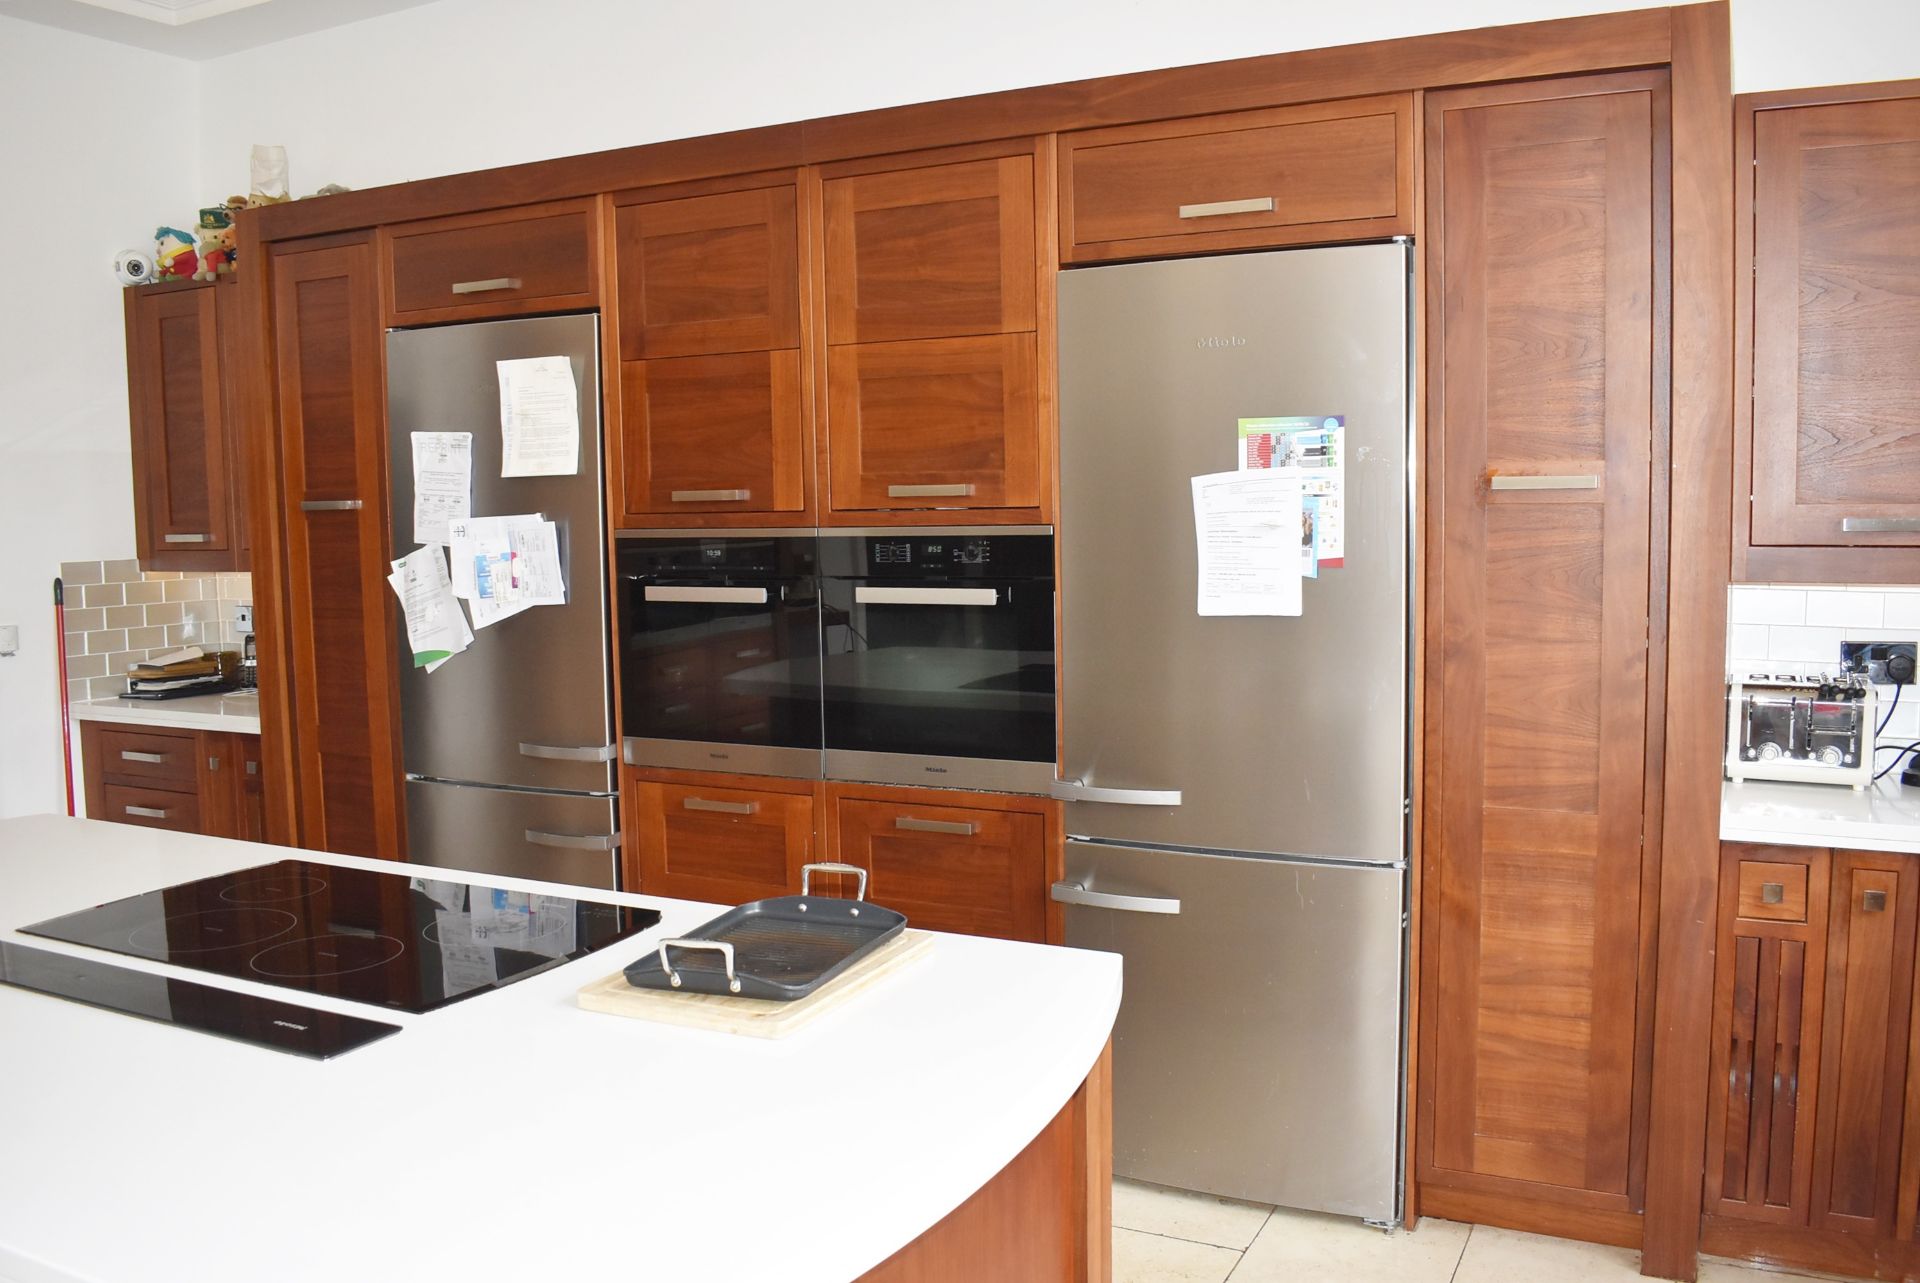 1 x Bespoke Contemporary Fitted Kitchen With Appliances - Features Solid Walnut Doors - NO VAT! - Image 20 of 114